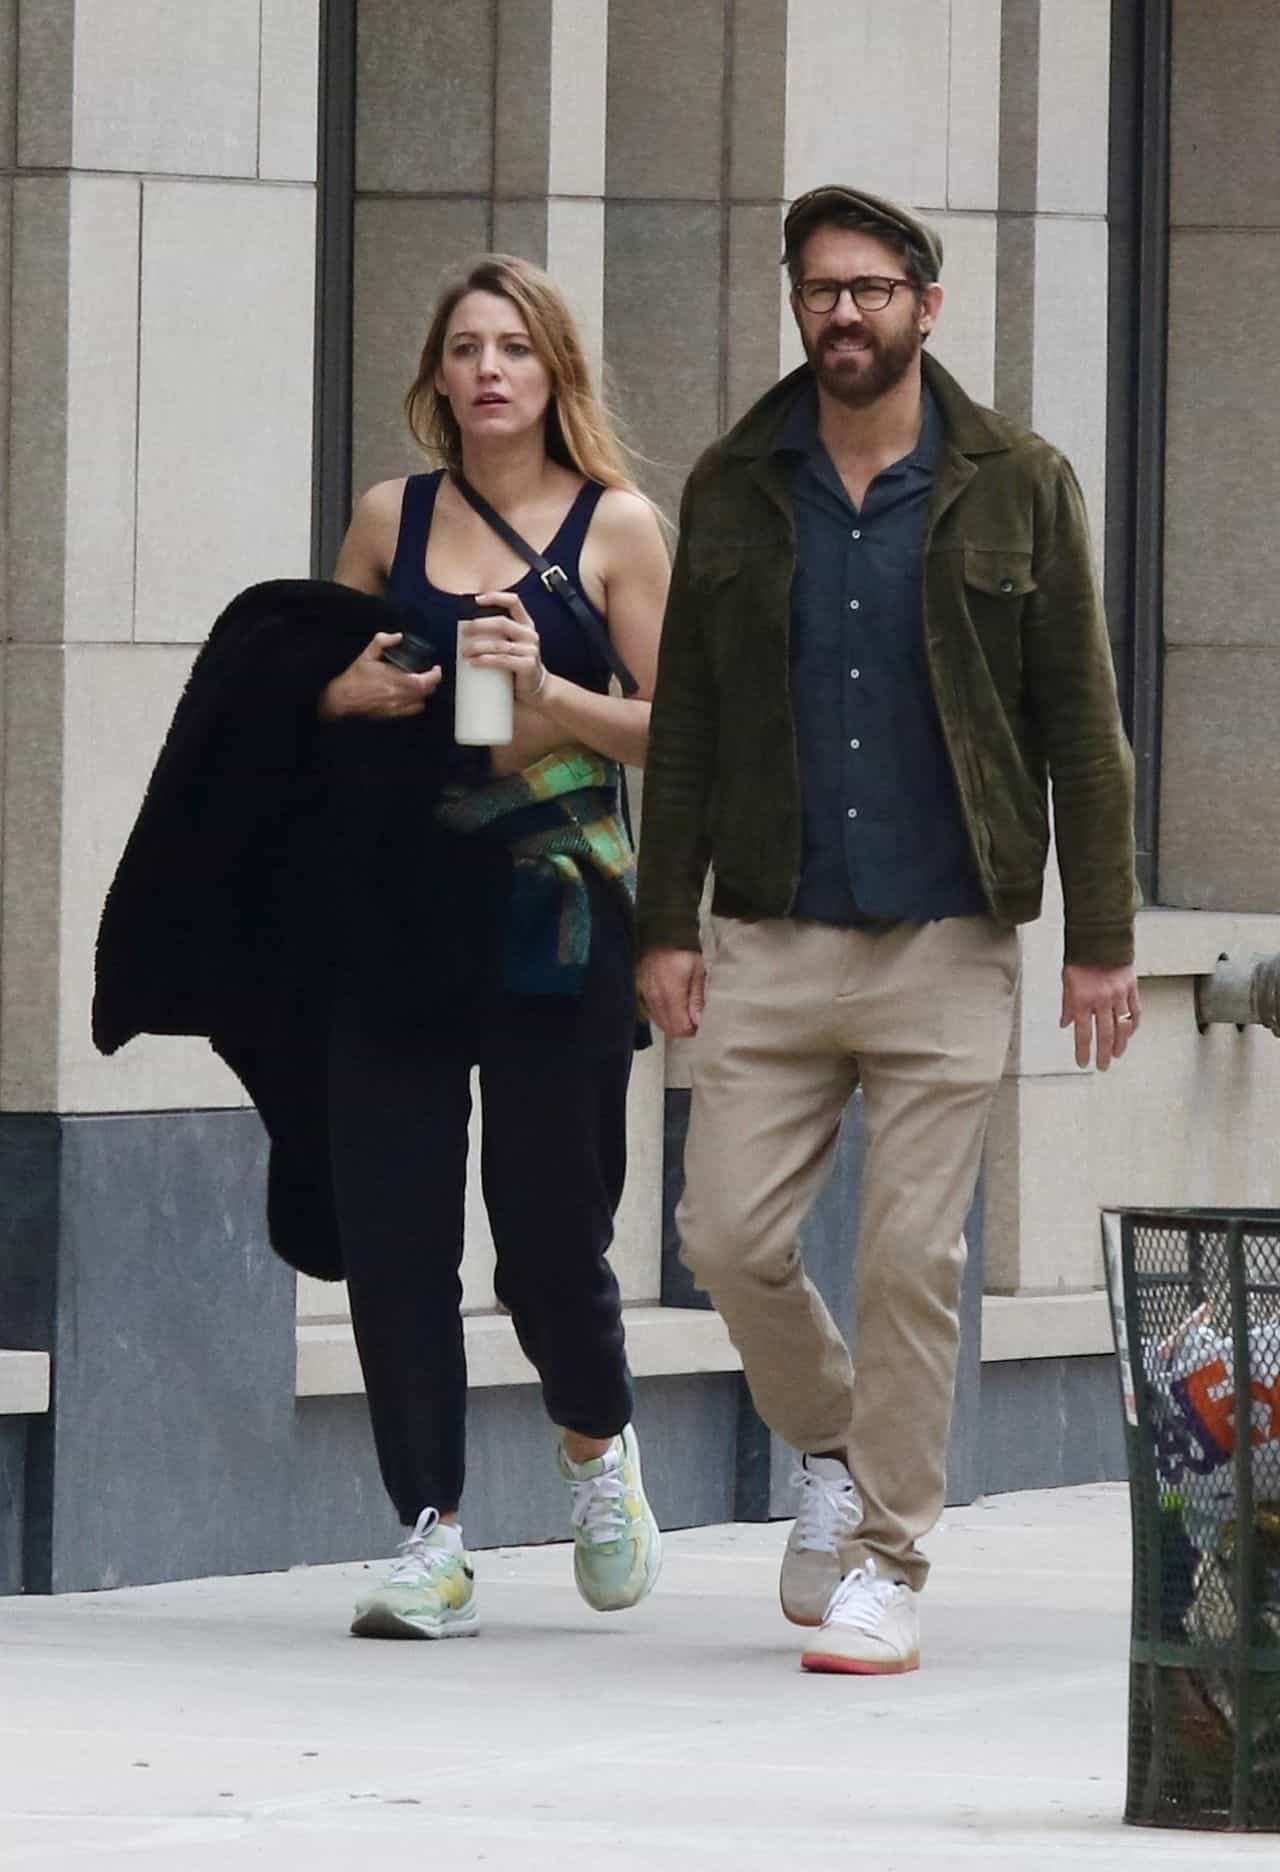 Blake Lively Wore a Sports Bra as She Walked with Ryan Reynolds After Gym